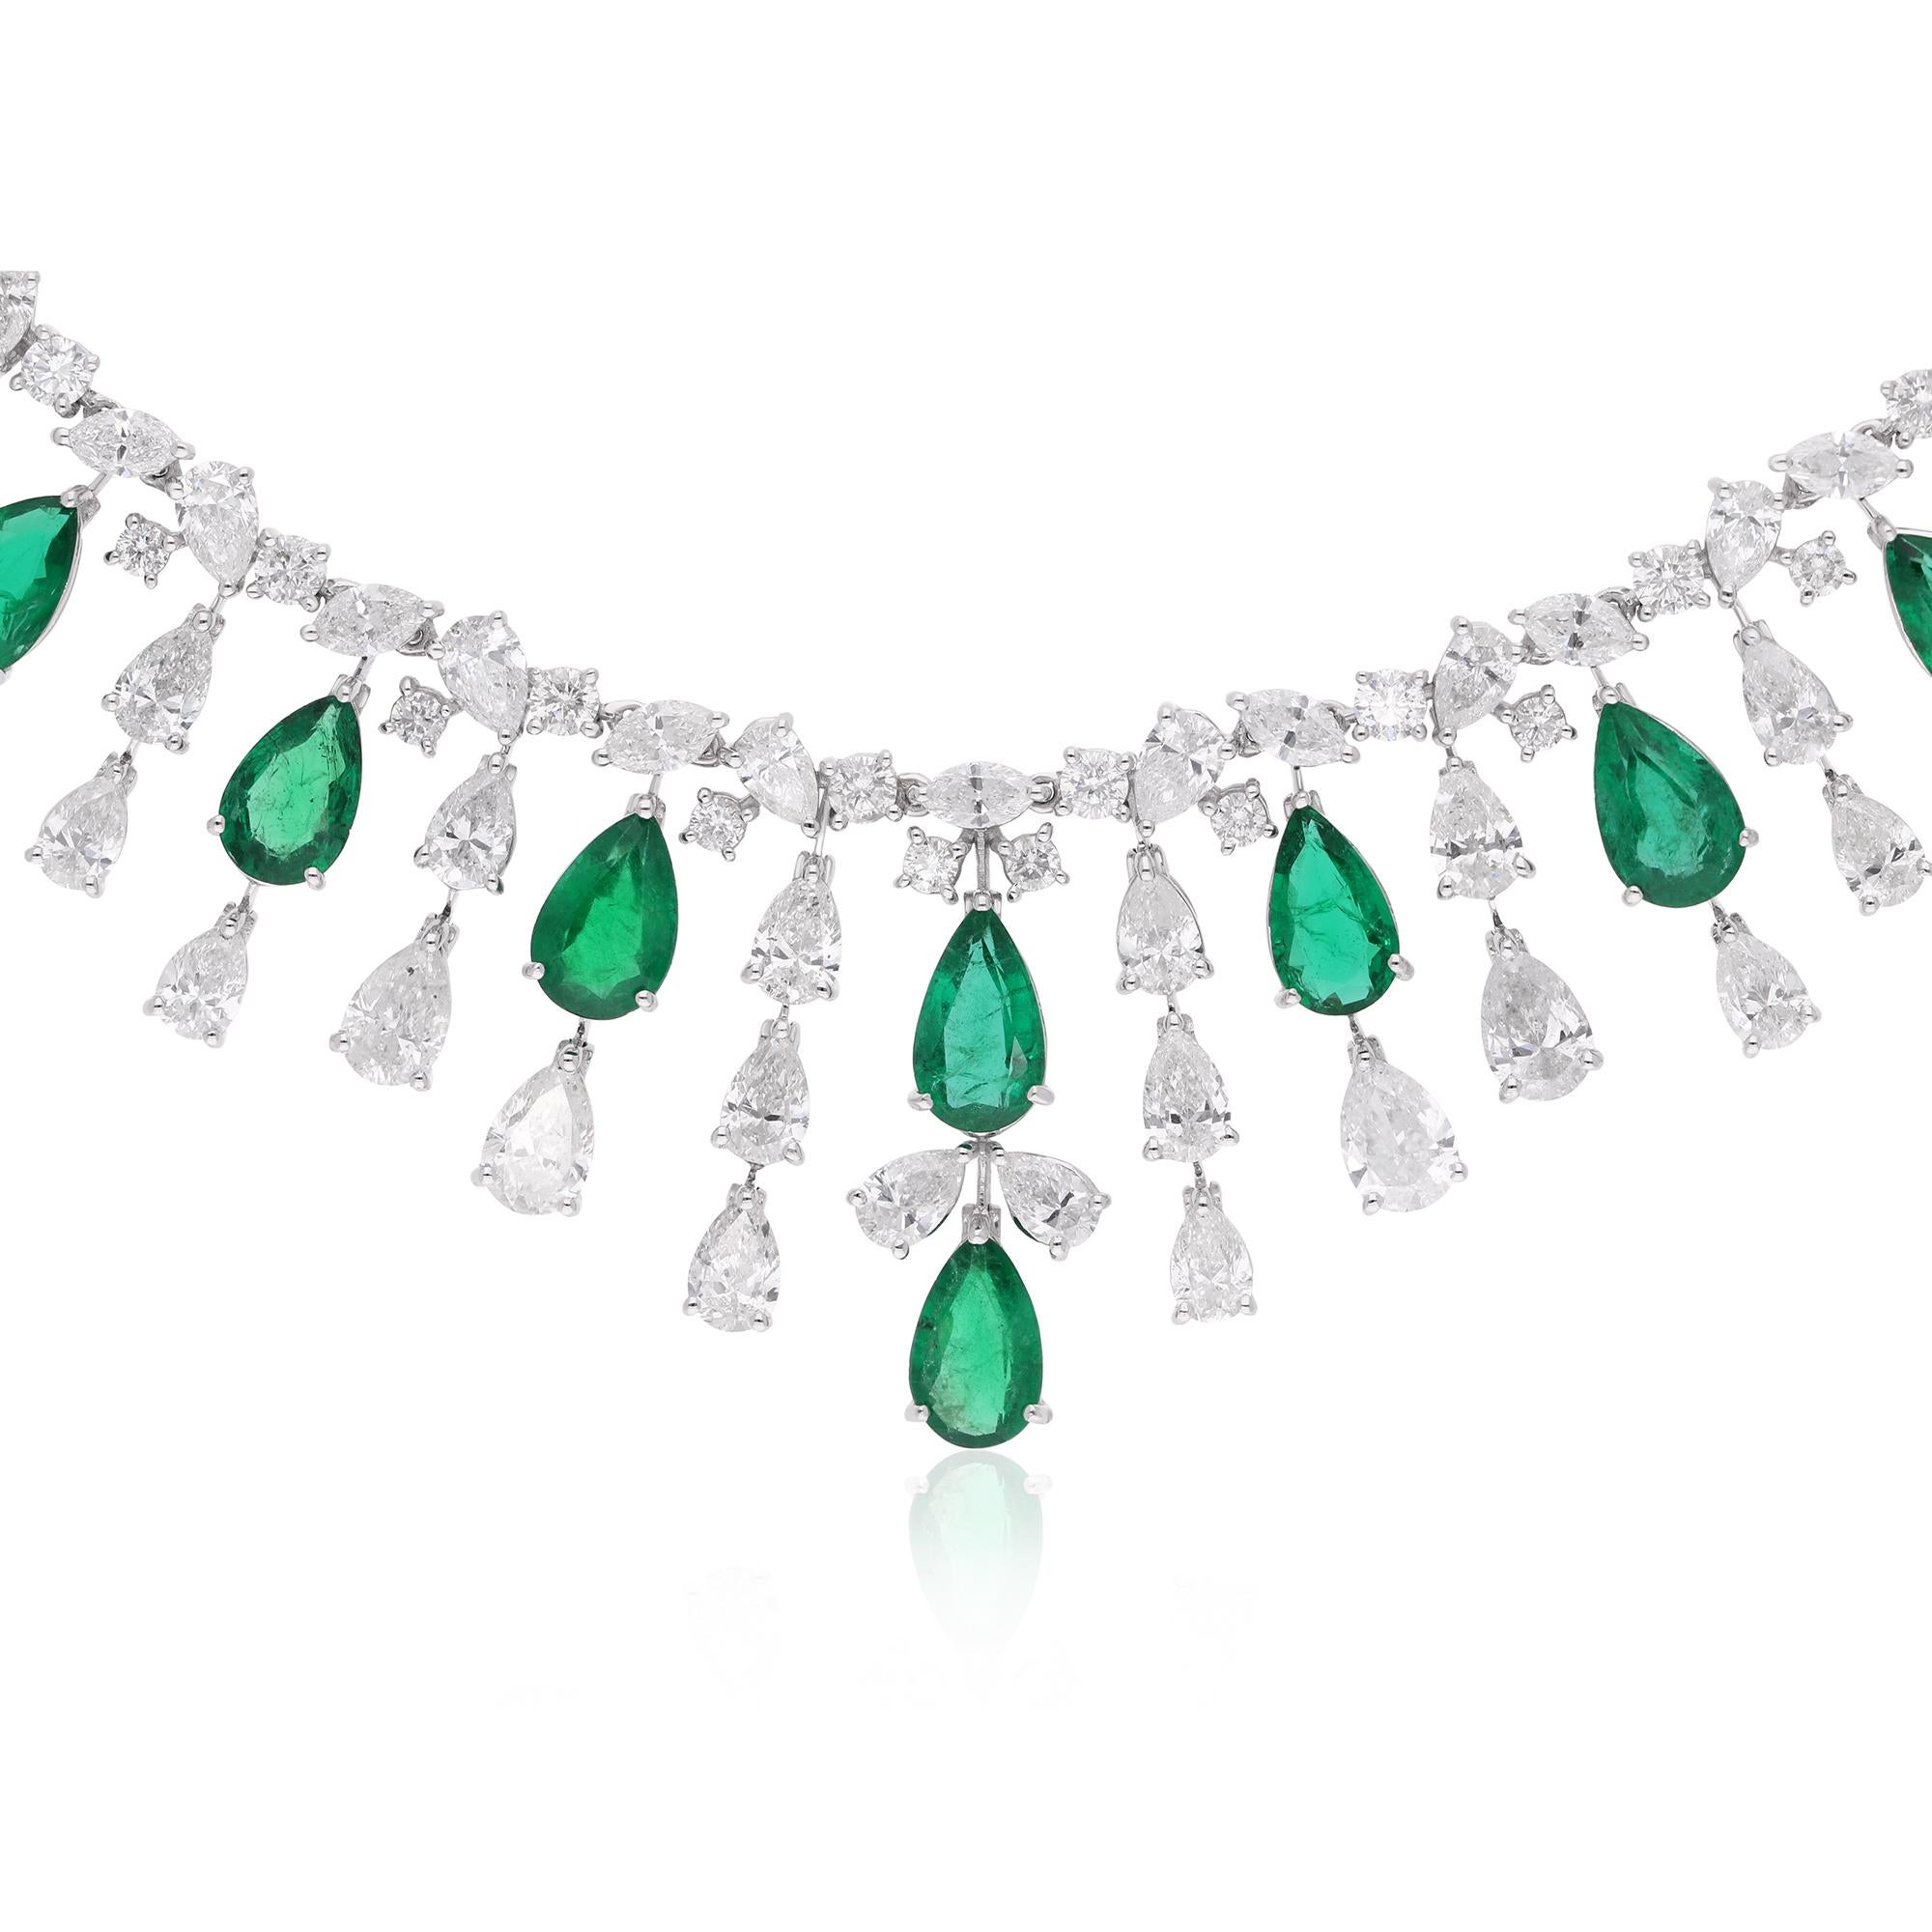 Surrounding the emerald are shimmering Diamonds, meticulously set in a halo design. These Diamonds, chosen for their exceptional brilliance and fire, add a touch of luxury and glamour to the necklace, enhancing the beauty of the emerald with their